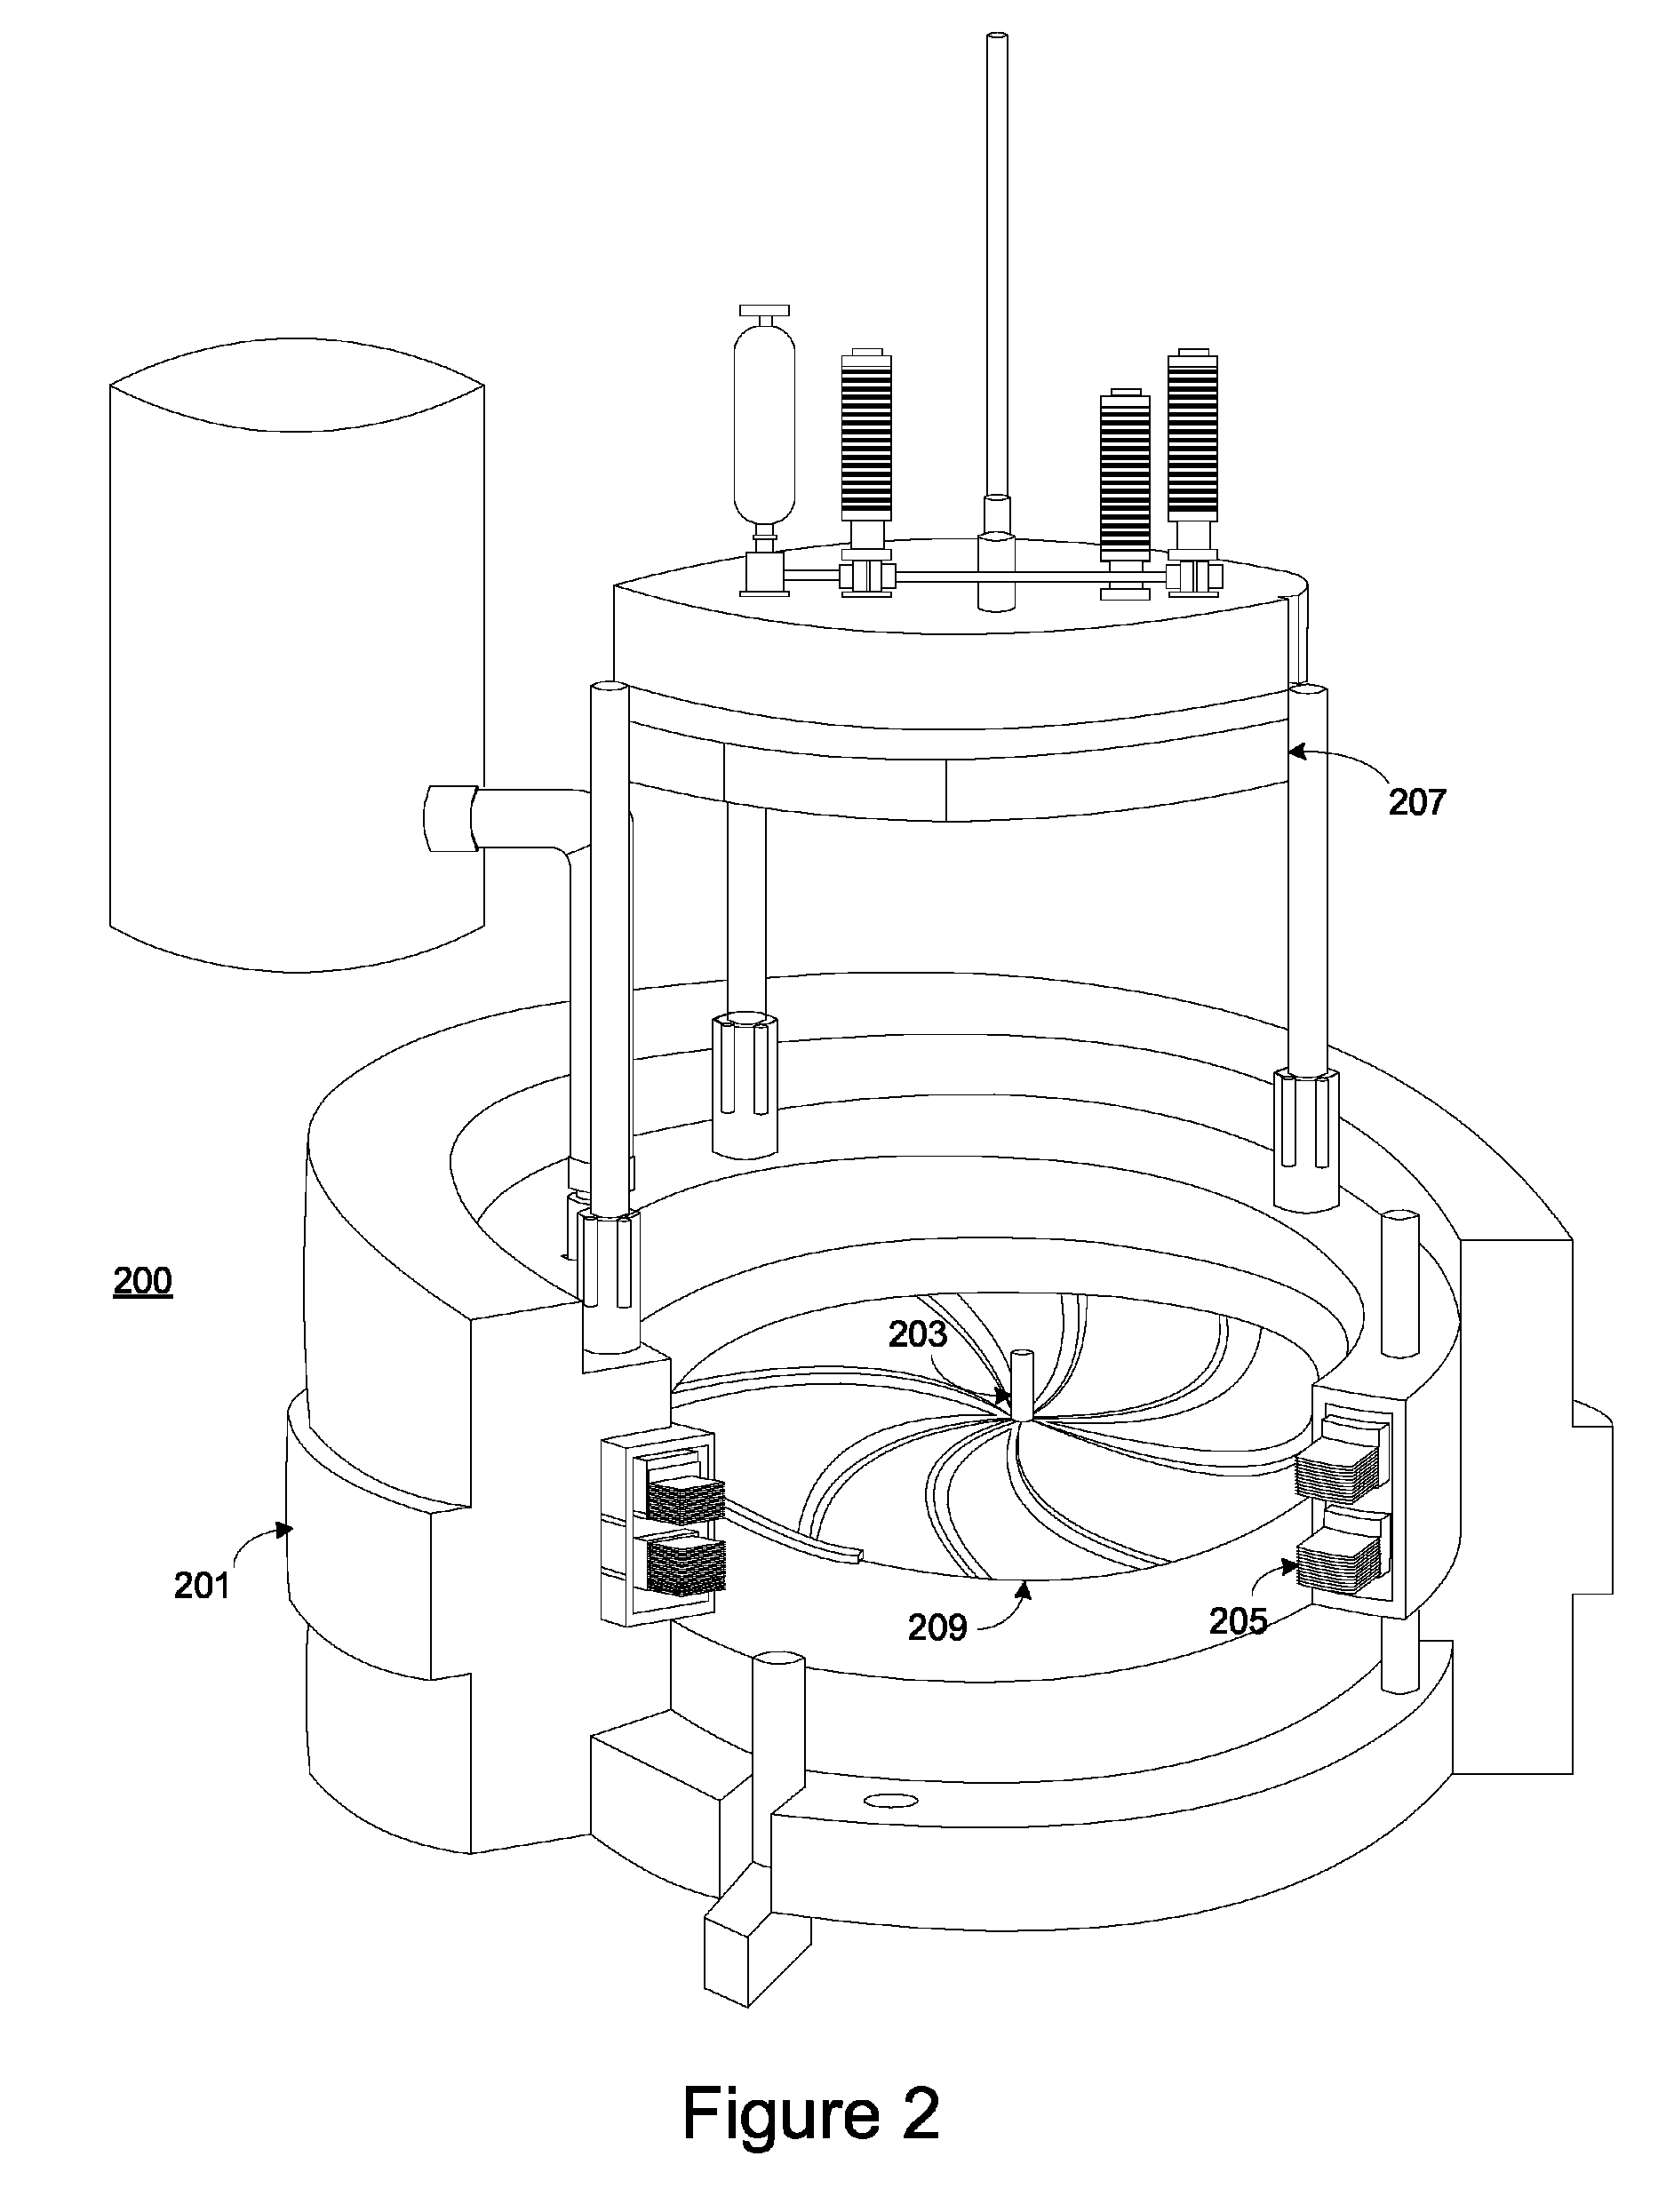 System and method for automated cyclotron procedures